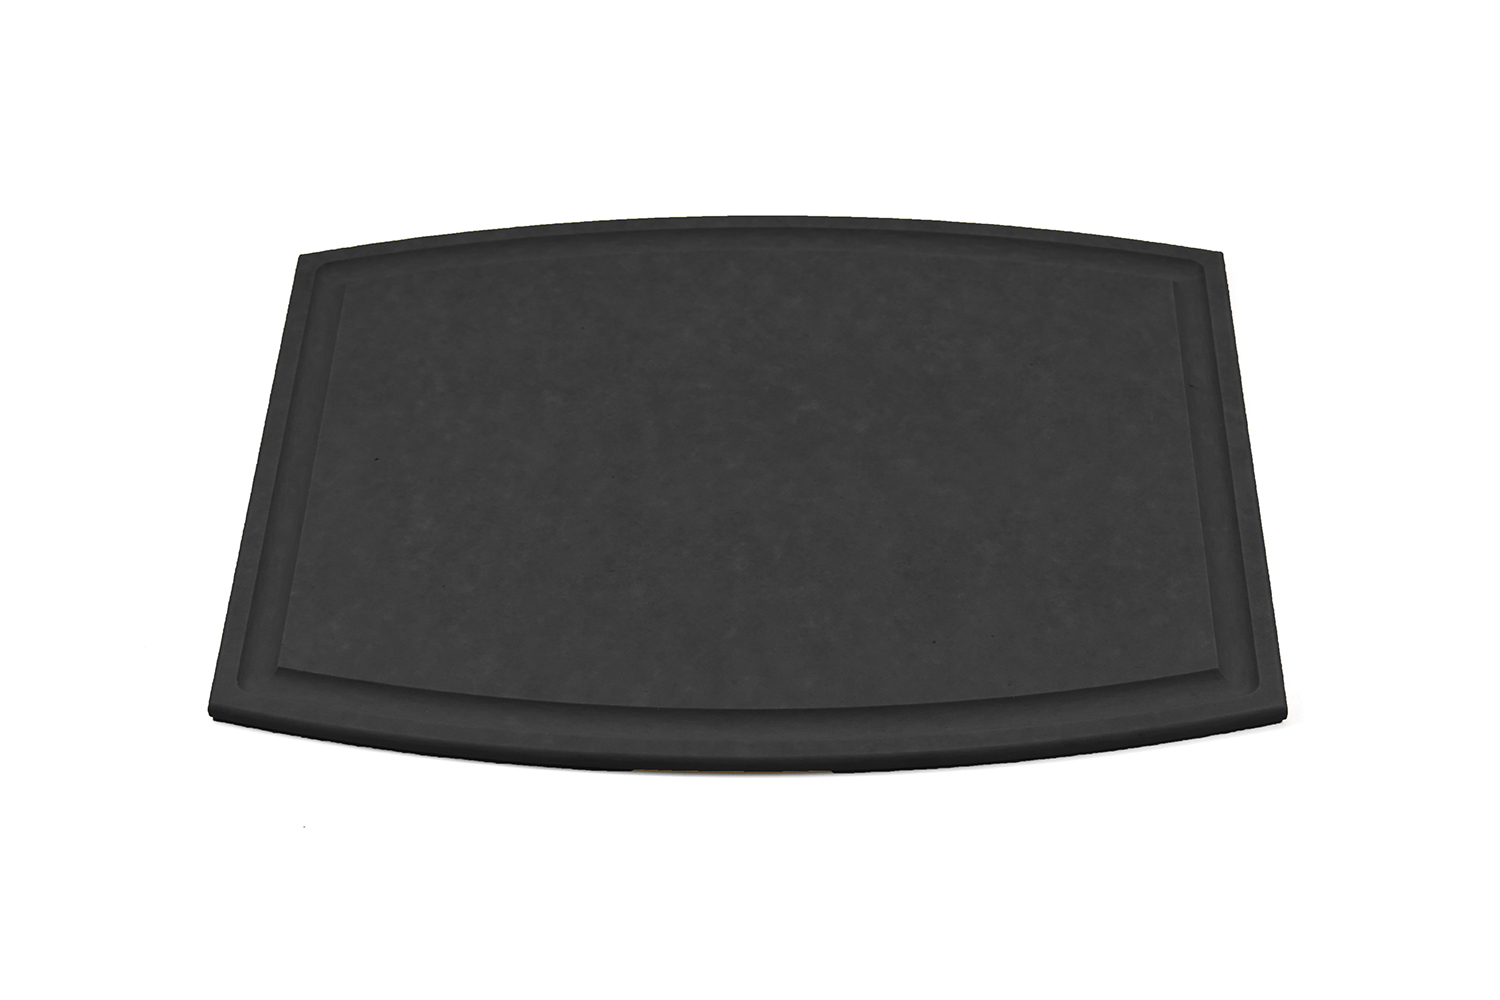 Arched Richlite Cutting Board with Juice Groove (Dishwasher Safe)